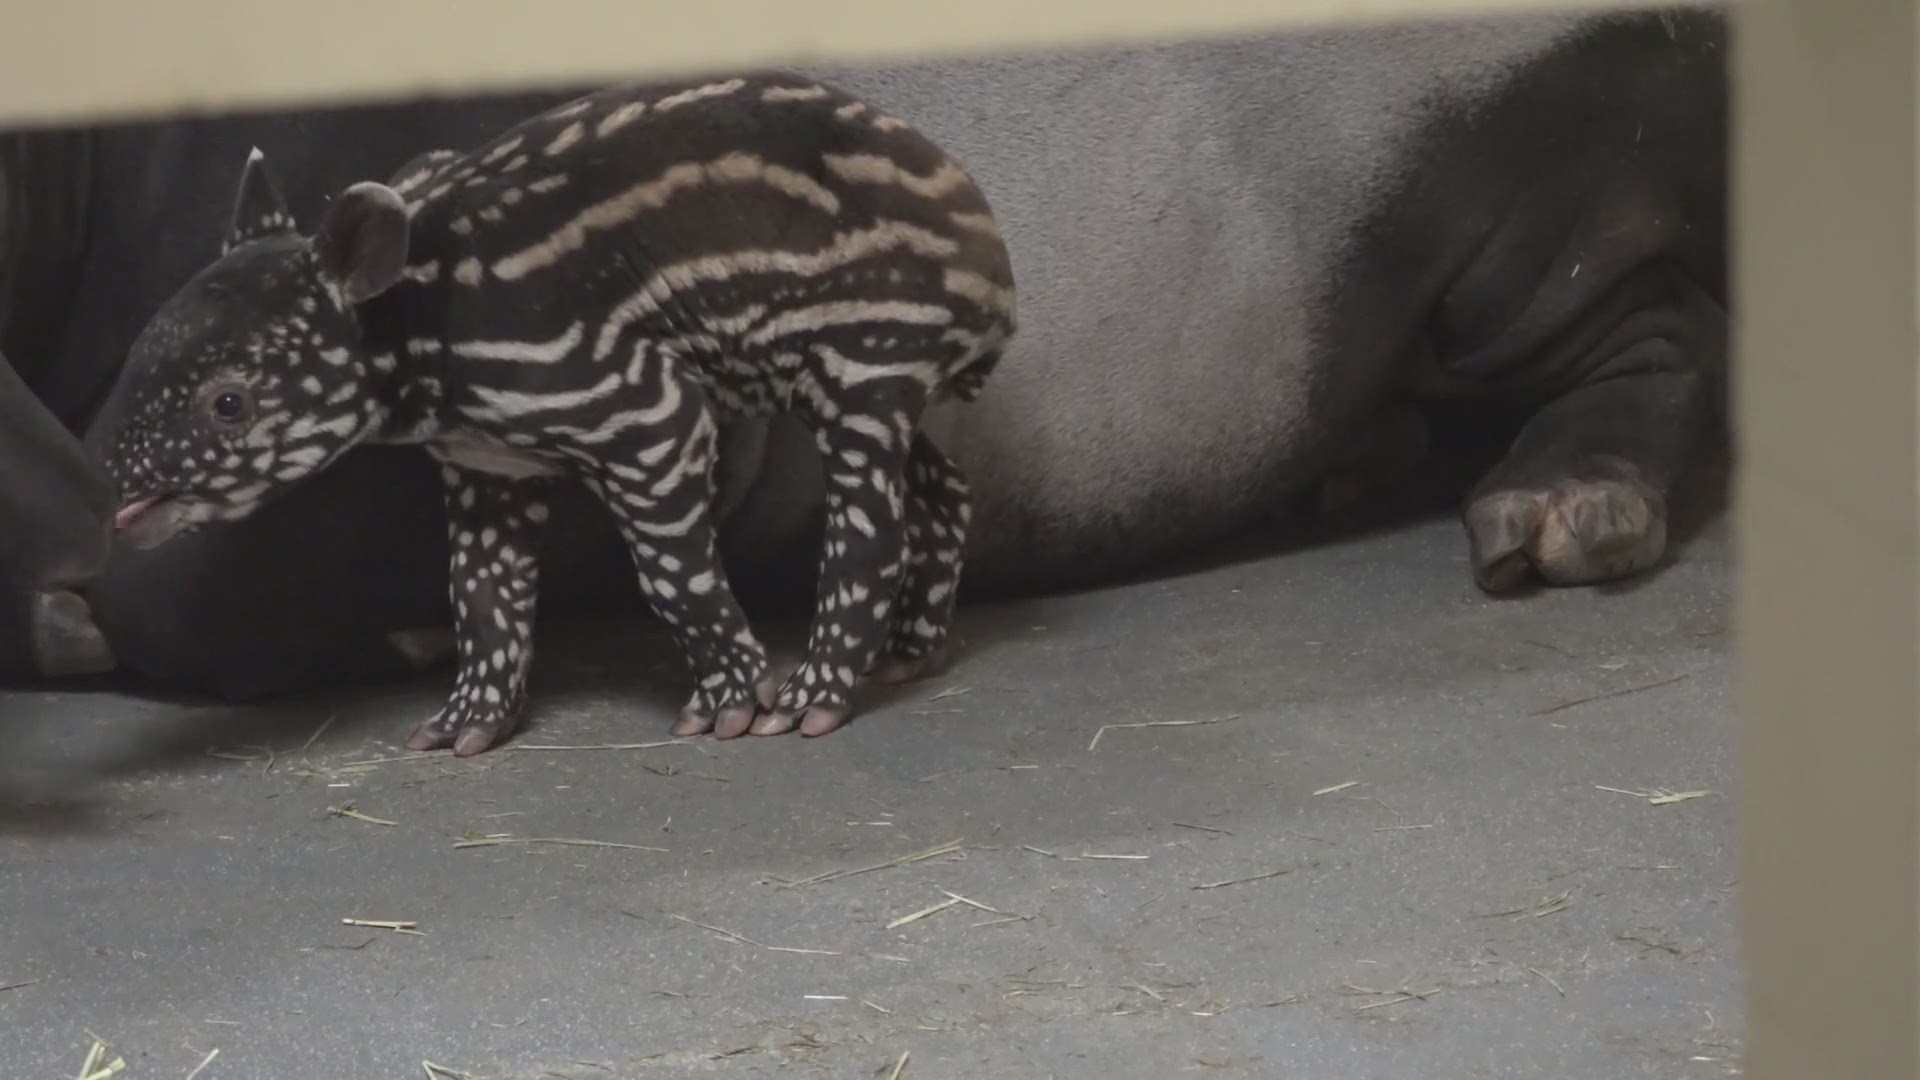 He is the first tapir born in the zoo's 114-year history